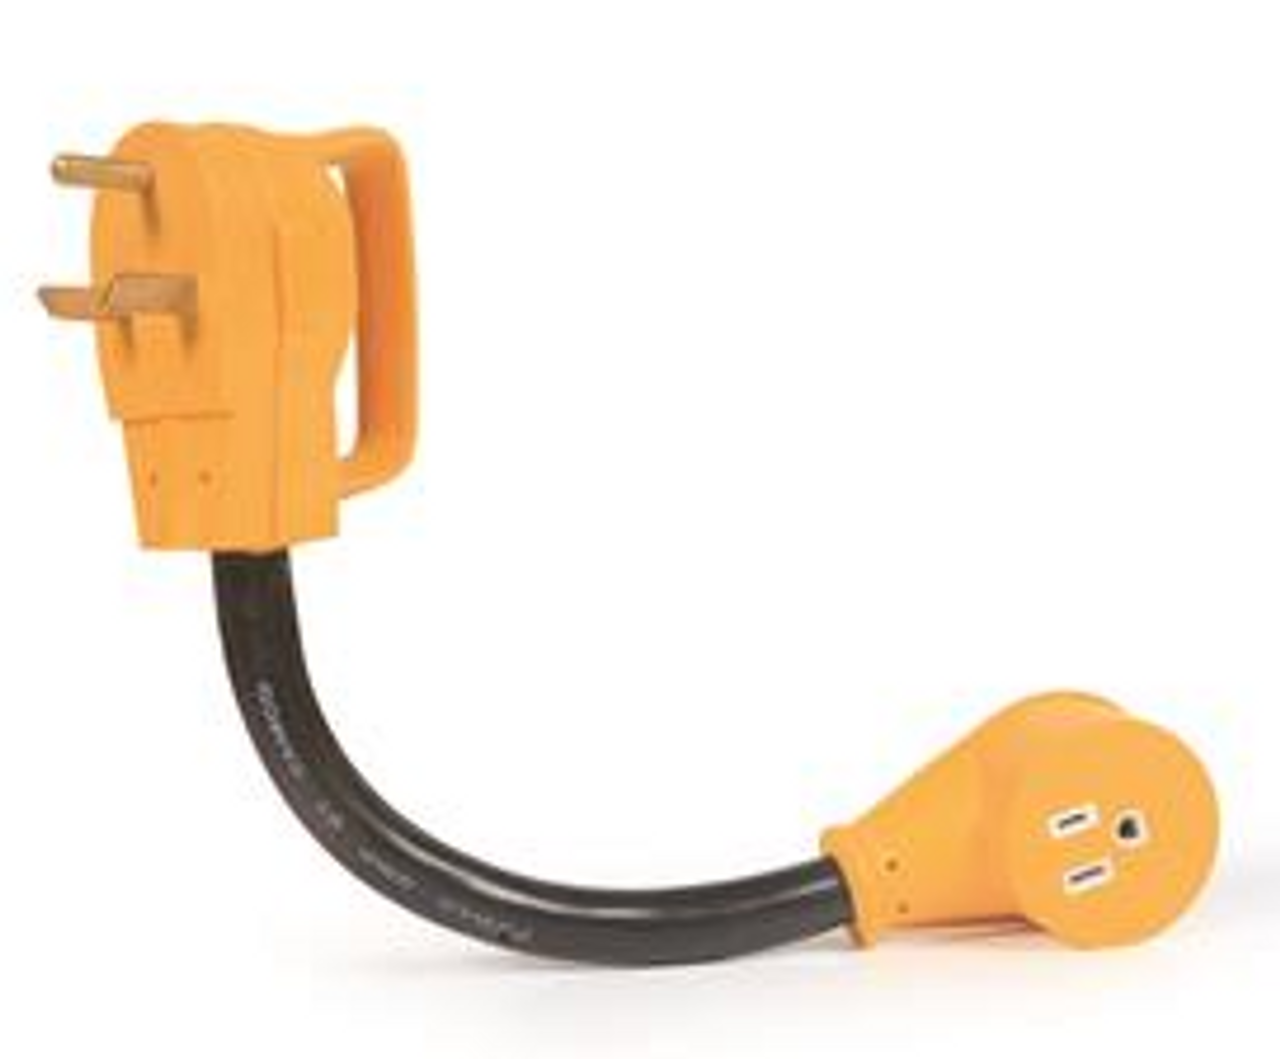  DOGBONE ELECTRICAL ADAPTER - 30 AMP MALE TO 15 AMP FEMALE (19-1016)